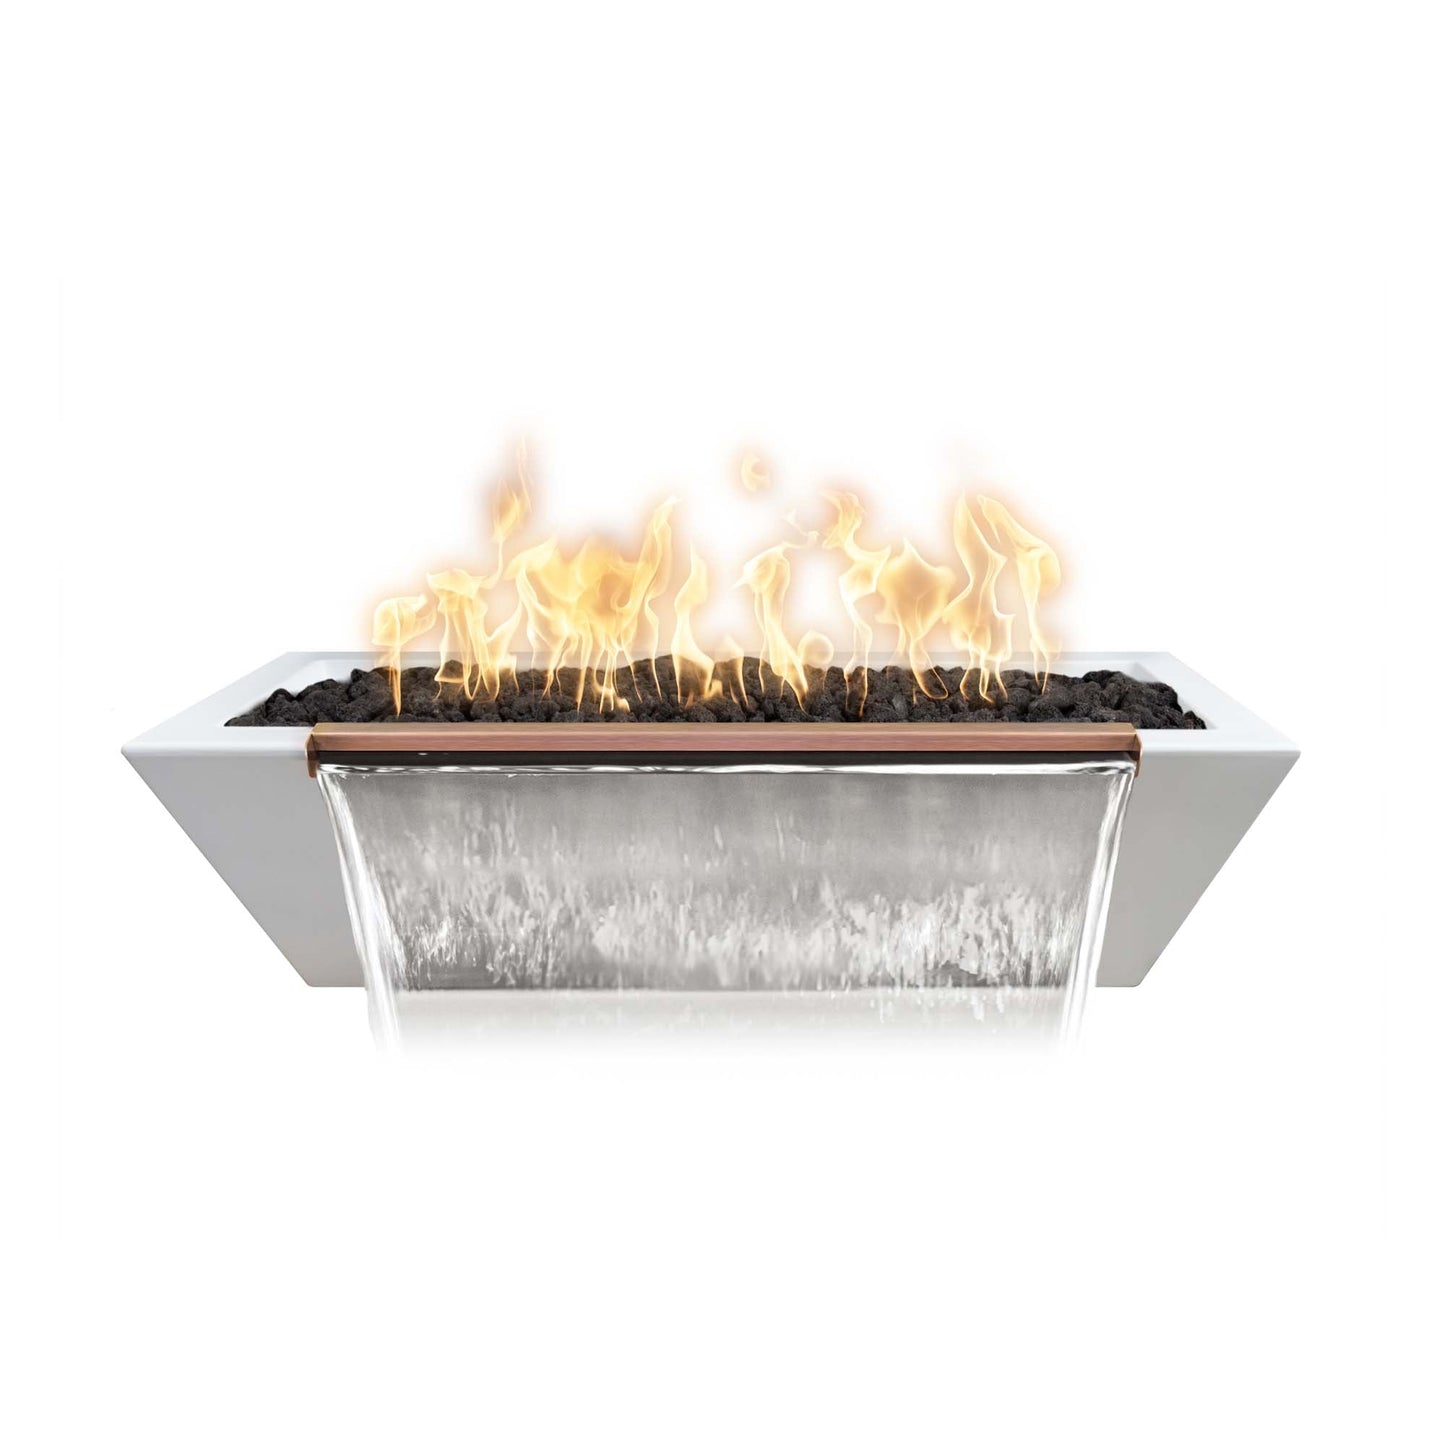 The Outdoor Plus Linear Maya 60" White GFRC Concrete Liquid Propane Fire & Water Bowl with Match Lit Ignition